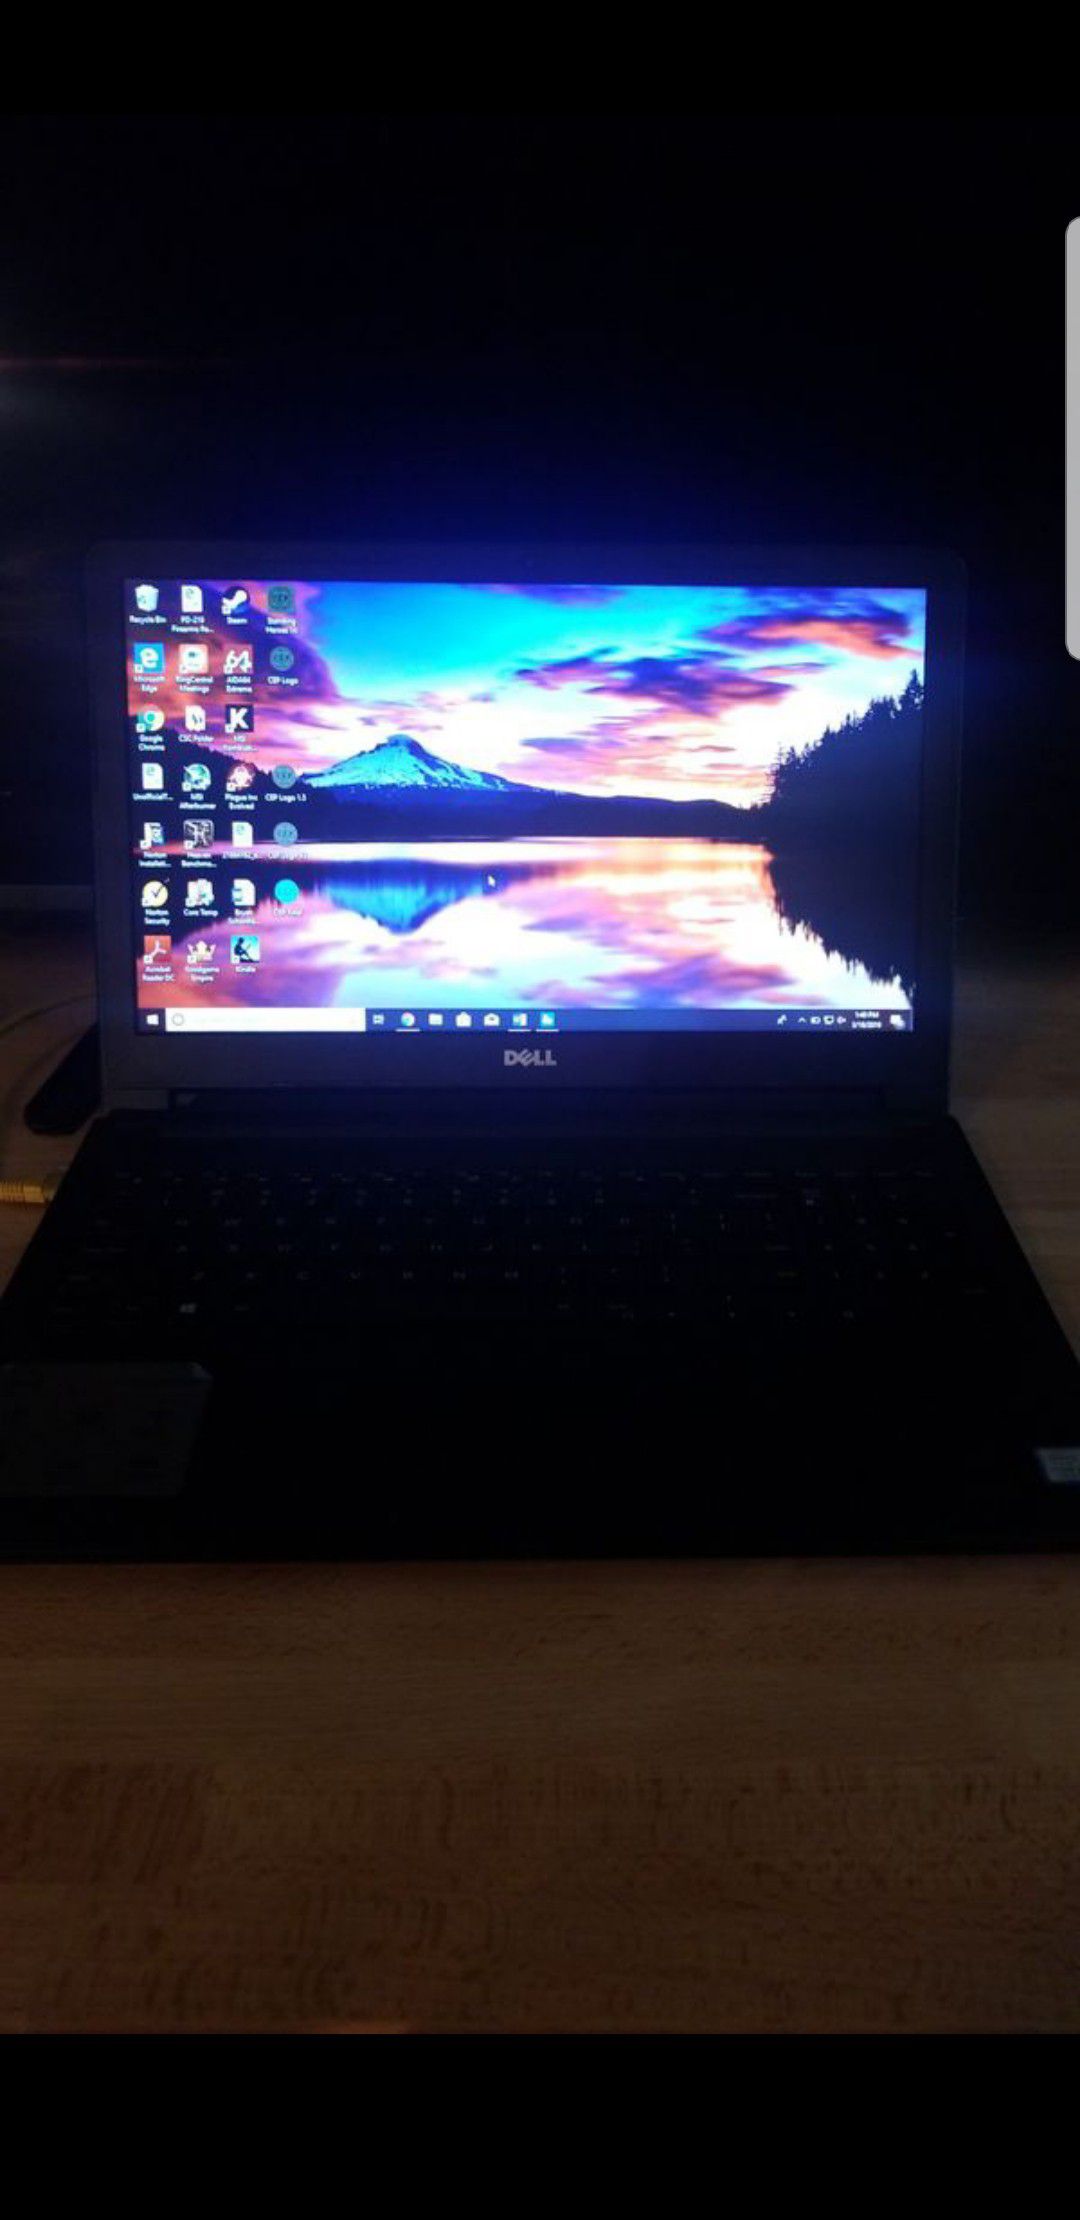 Dell Inspiron 15 Laptop Computer